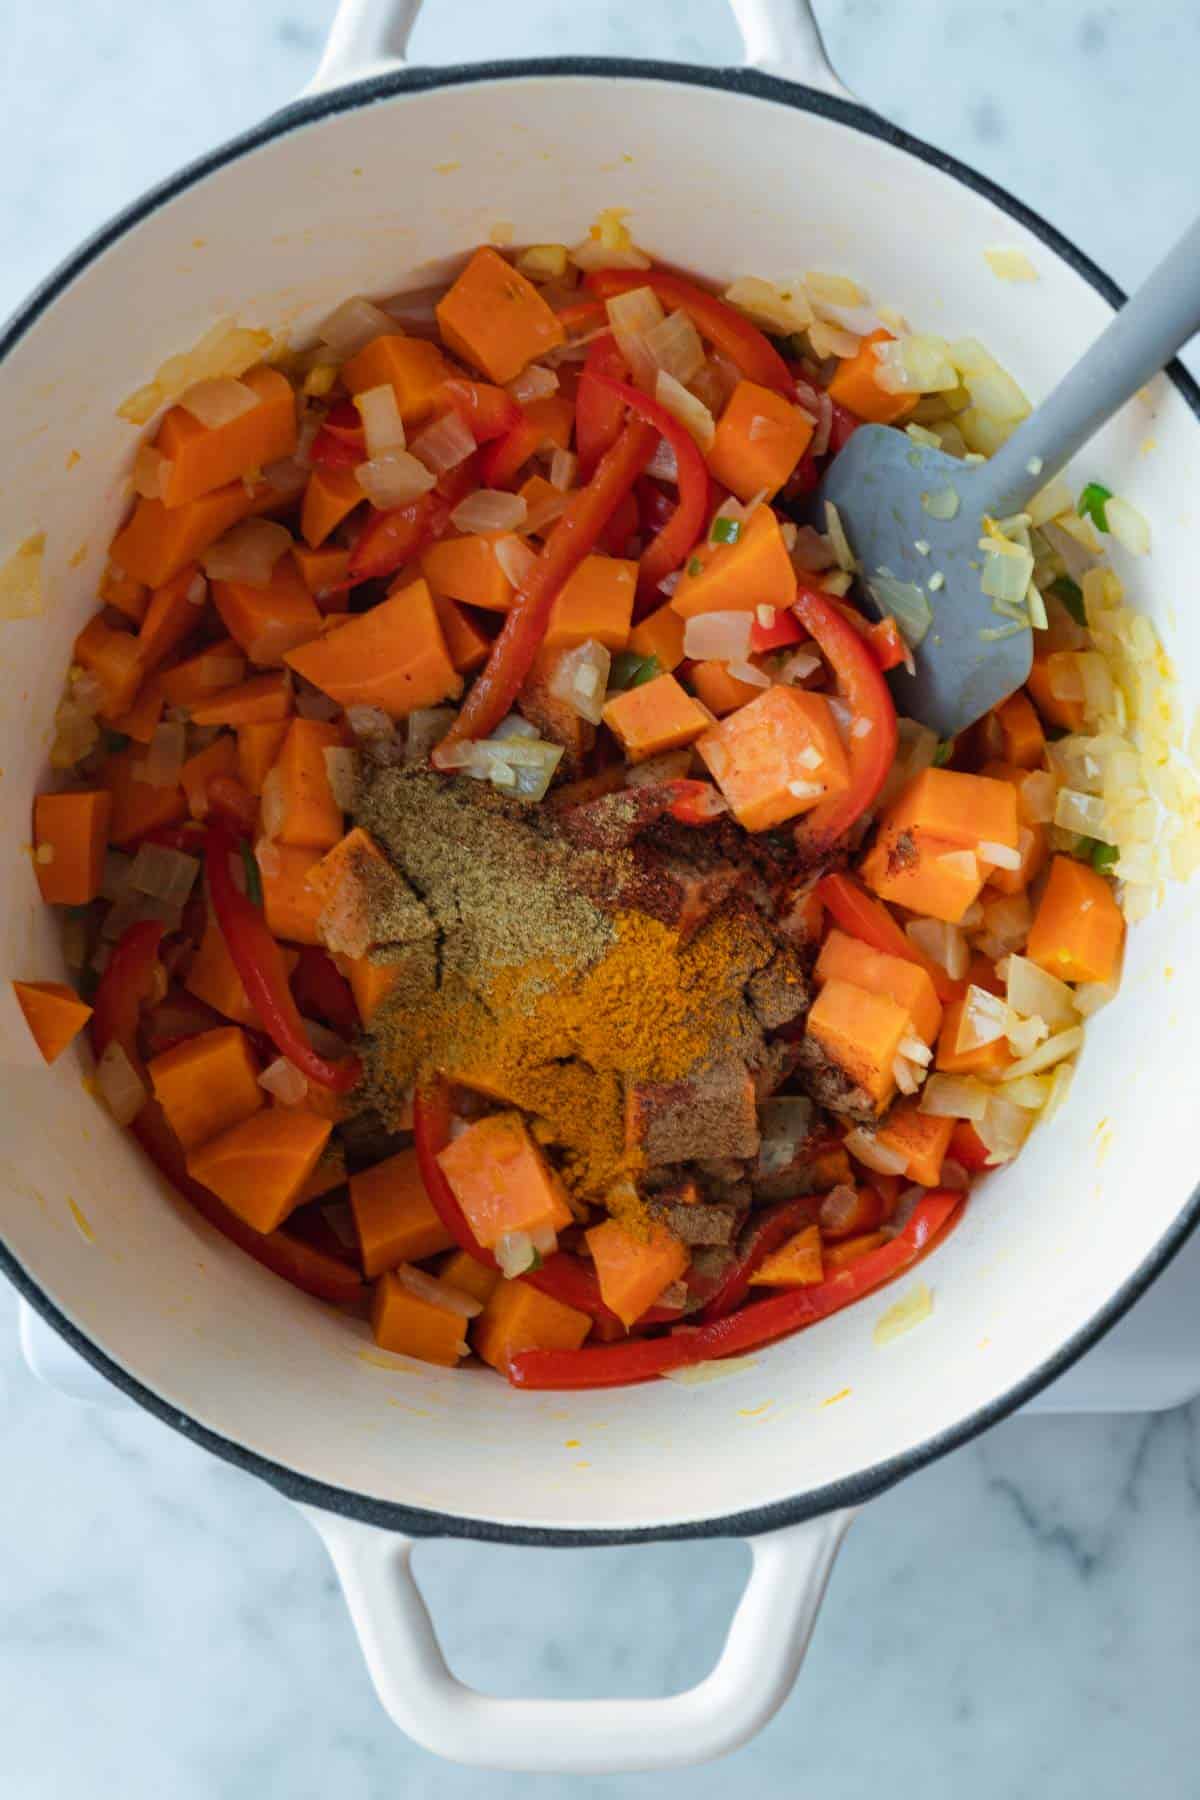 Chopped sweet potatoes, onion, red bell pepper, garlic, ginger, green chili pepper, and spices cooking in a white saucepan with a gray spatula.